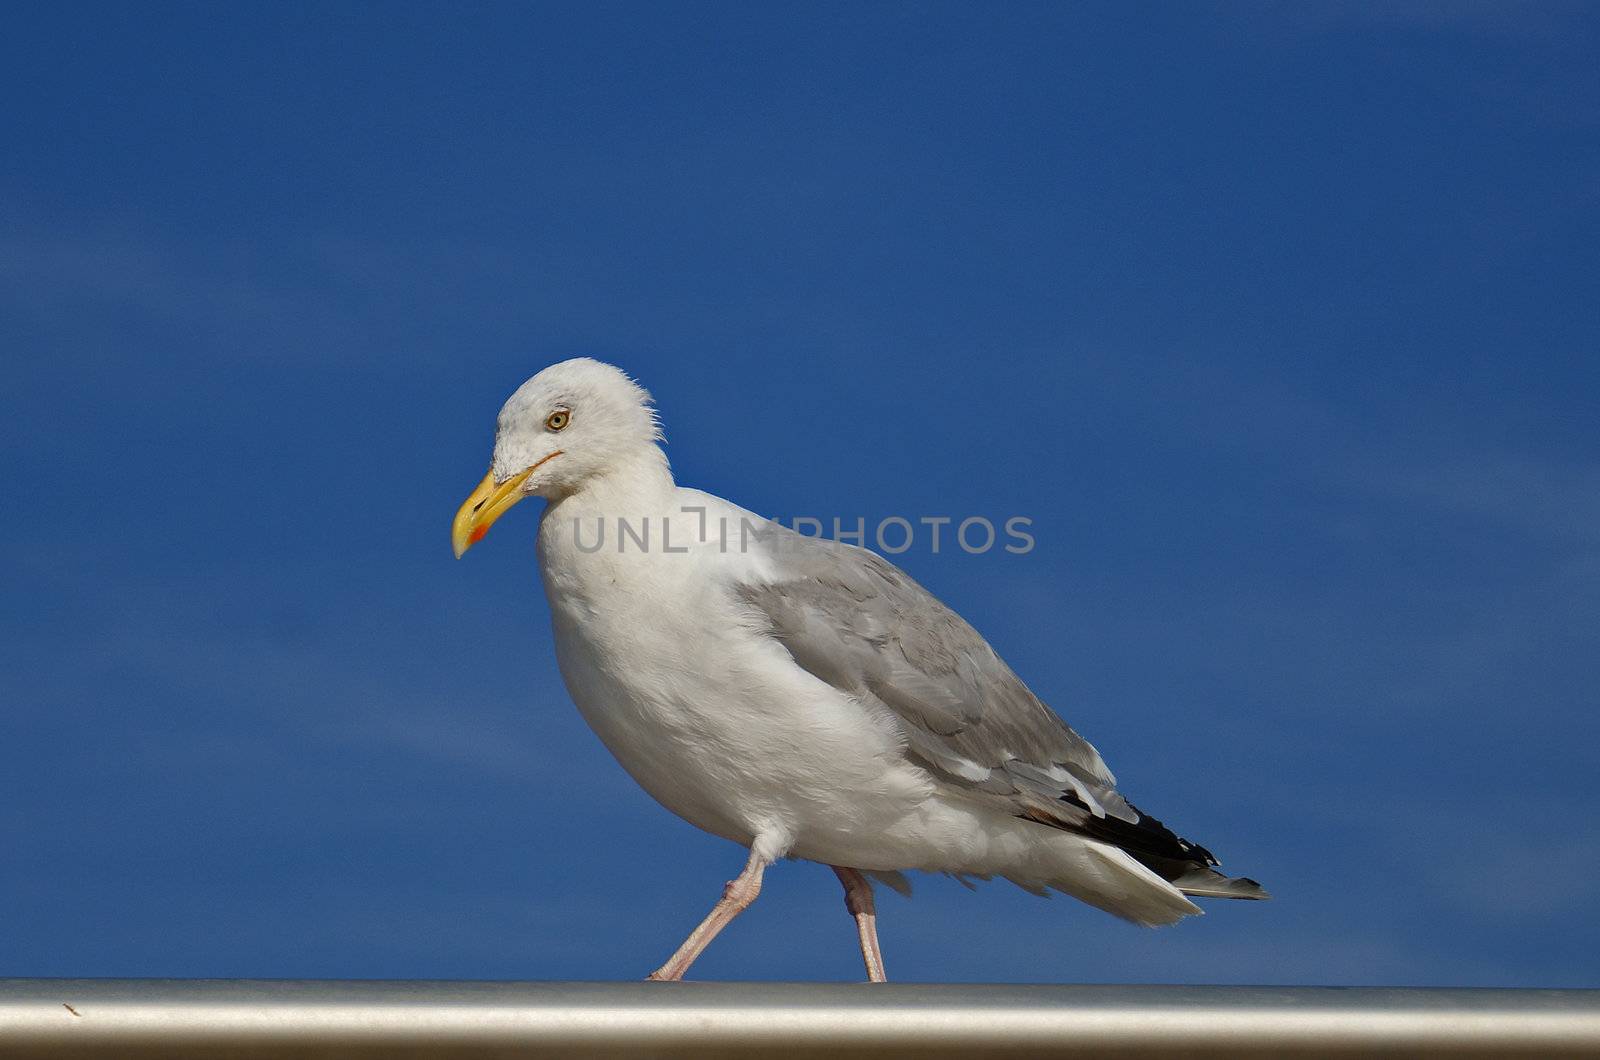 Seagull walking on the pier railing on the blue sky background